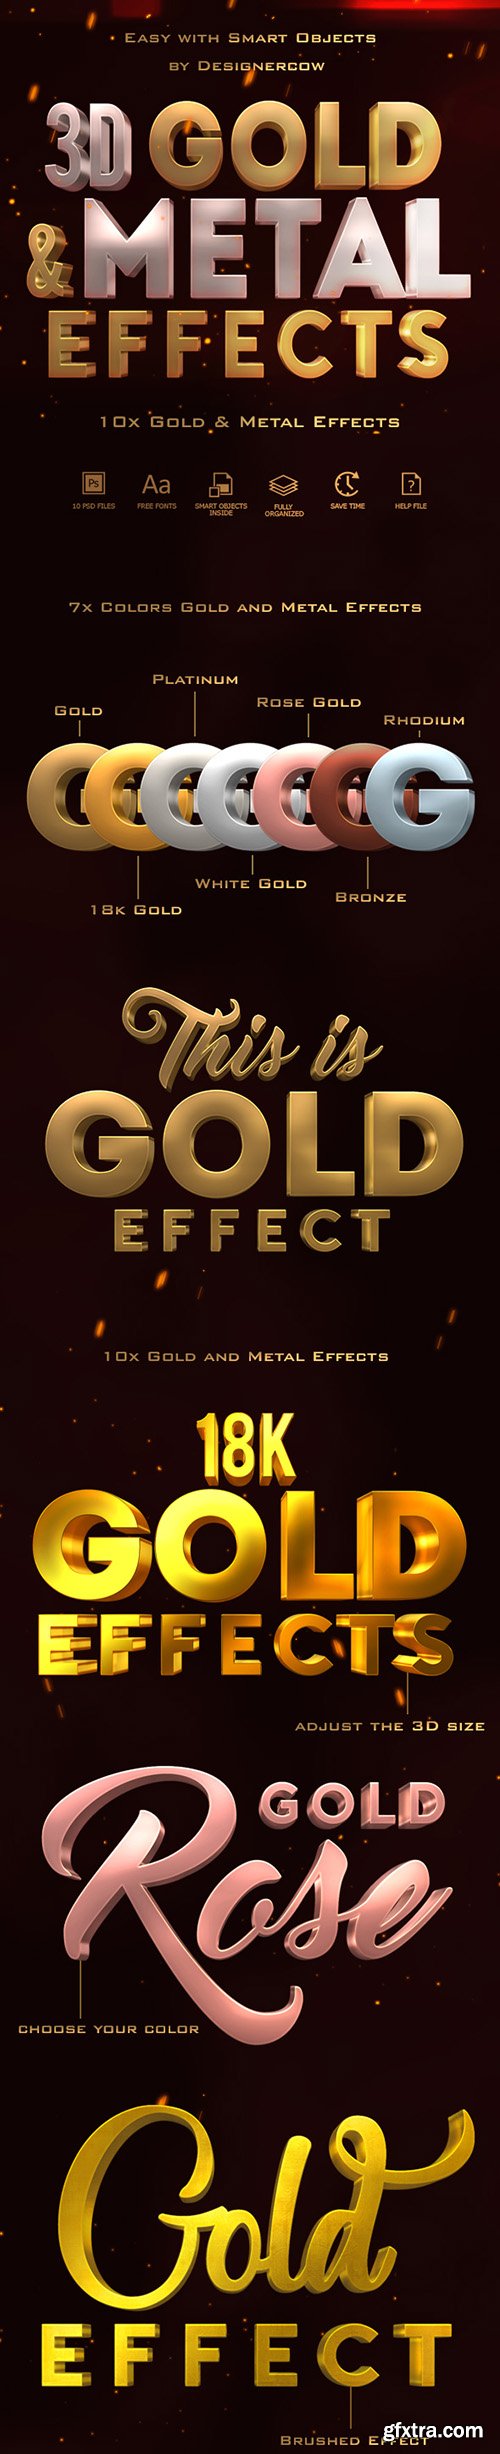 Graphicriver 3D Gold and Metal Effects 19406450